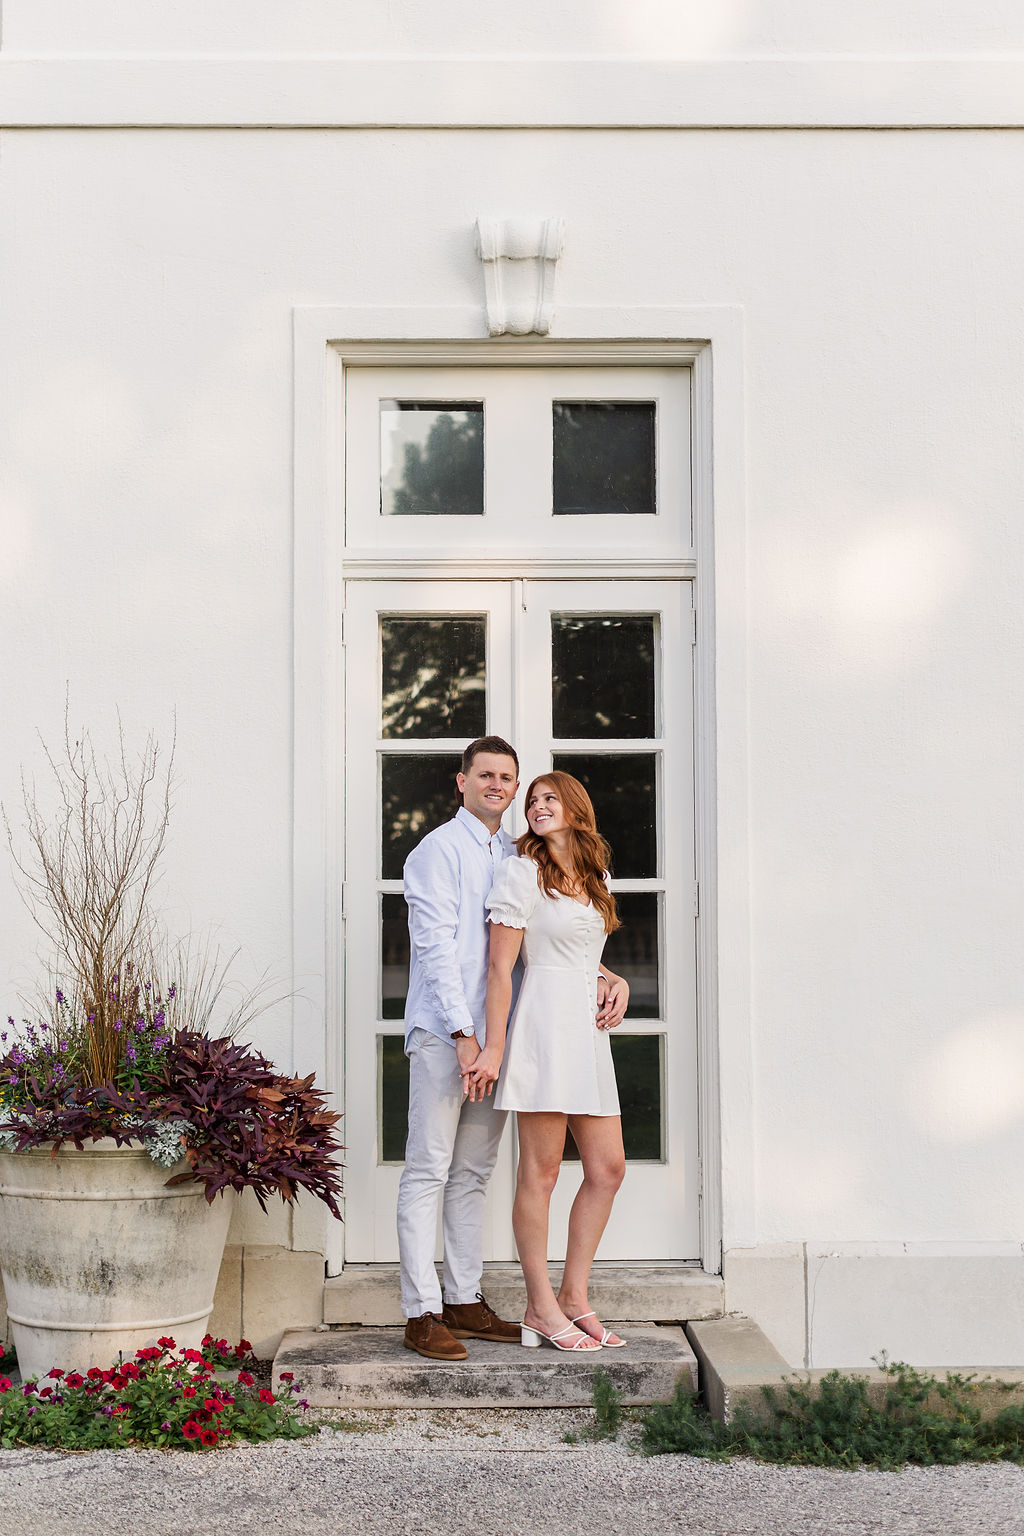 Lilly House and Gardens Engagement, Indianapolis Engagement Photographer, Lilly House and Gardens at Newfields, Newfields Engagement Photos